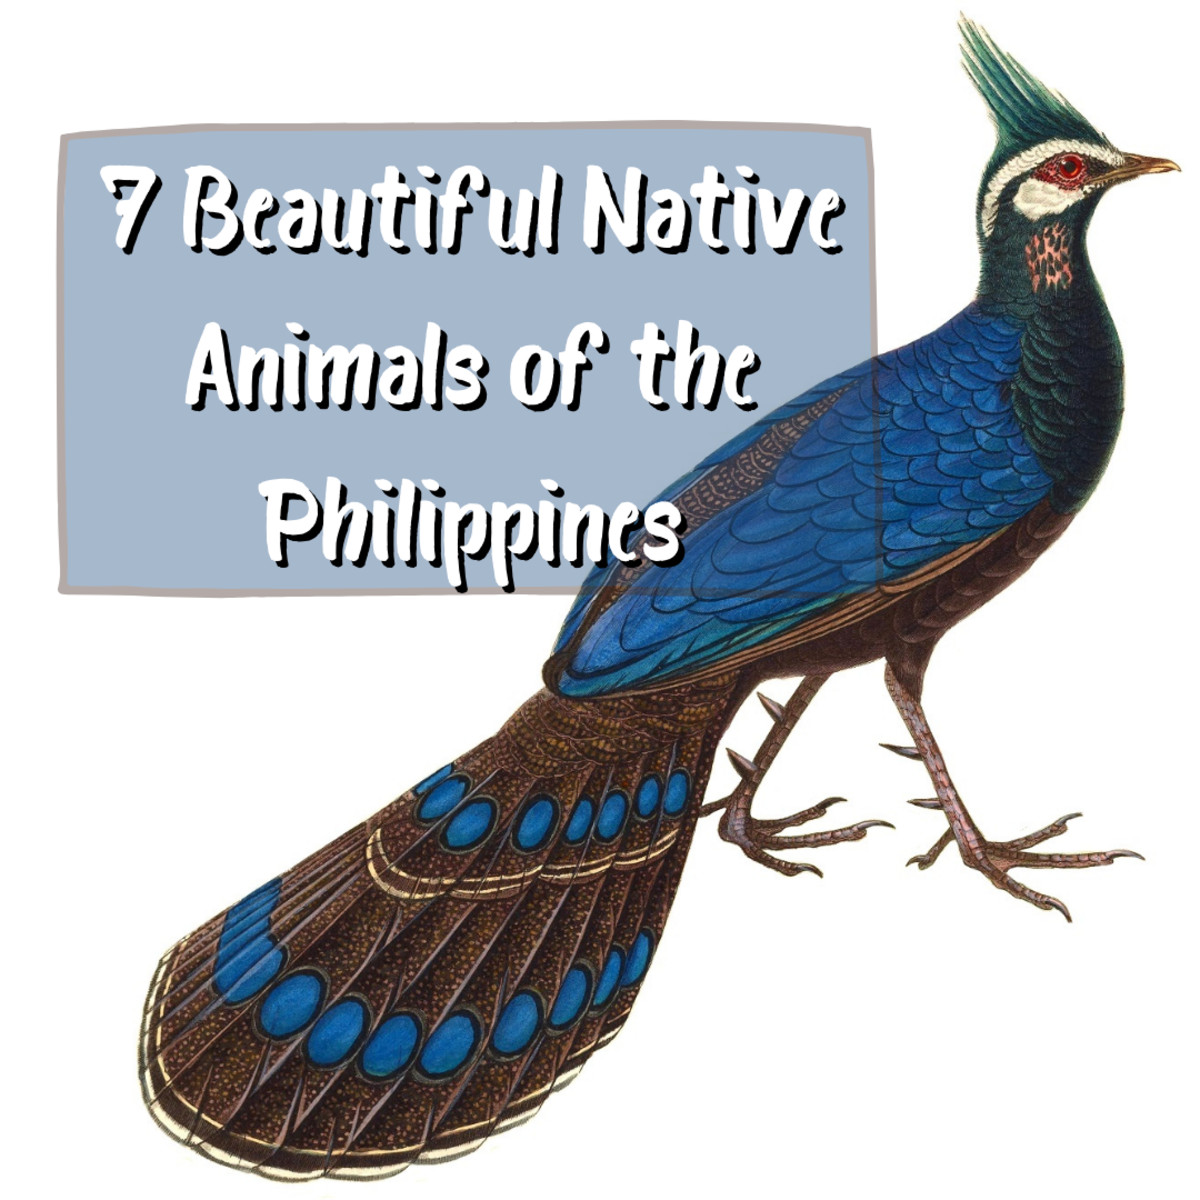 Read on to learn about 7 of the most enchantingly beautiful animals native to the Philippines. Pictured above is a Palawan peacock-pheasant, drawn in 1838 by Nicolas Huet and Jean Gabriel Prêtre.